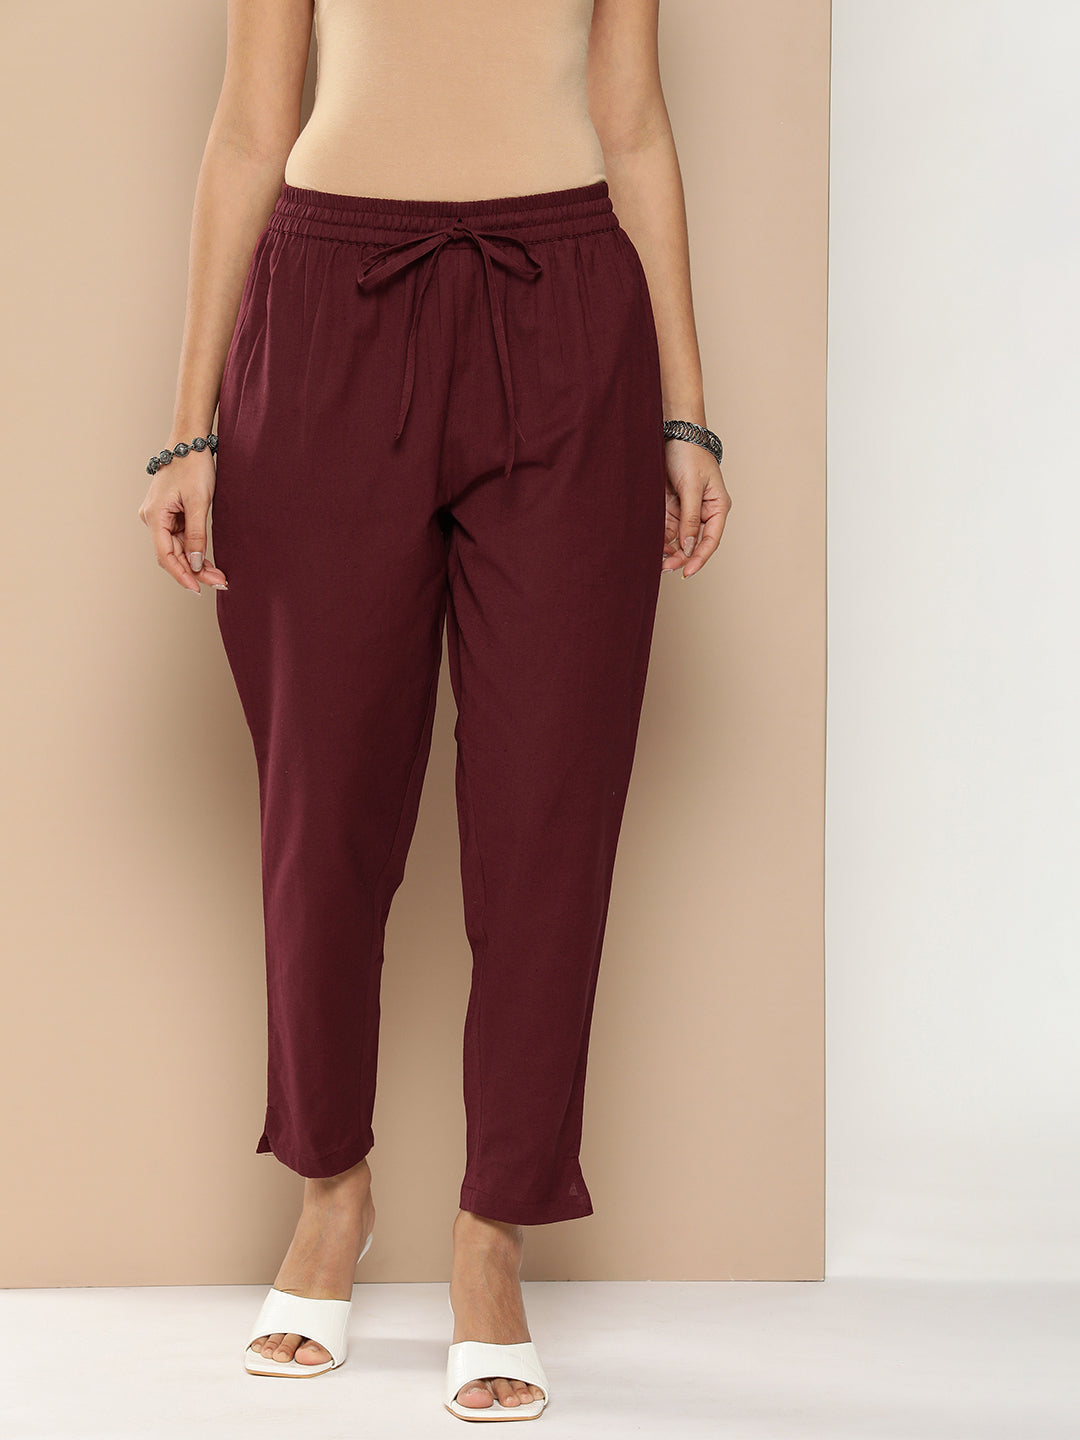 The High Rise Pencil Pant in Fluid Crepe - Curvy Fit